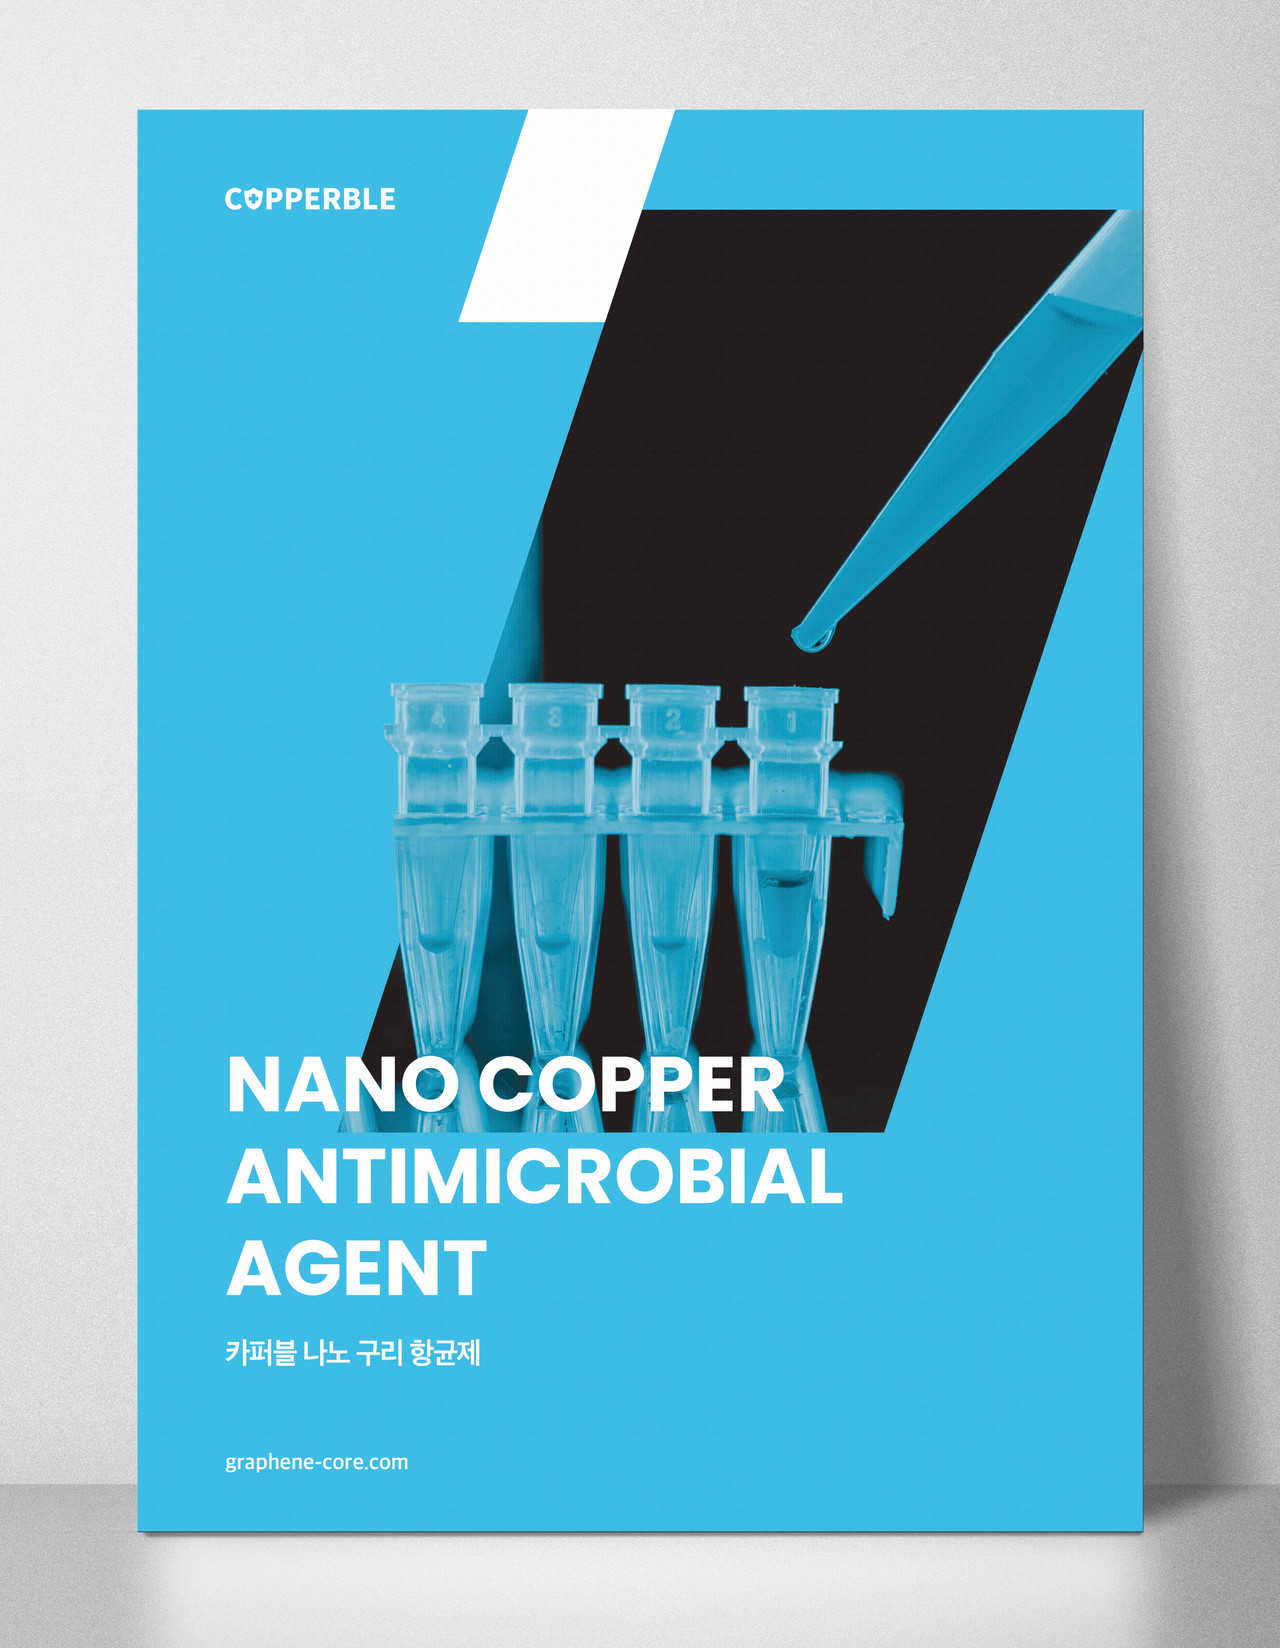 Copperble nano copper antimicrobial agent